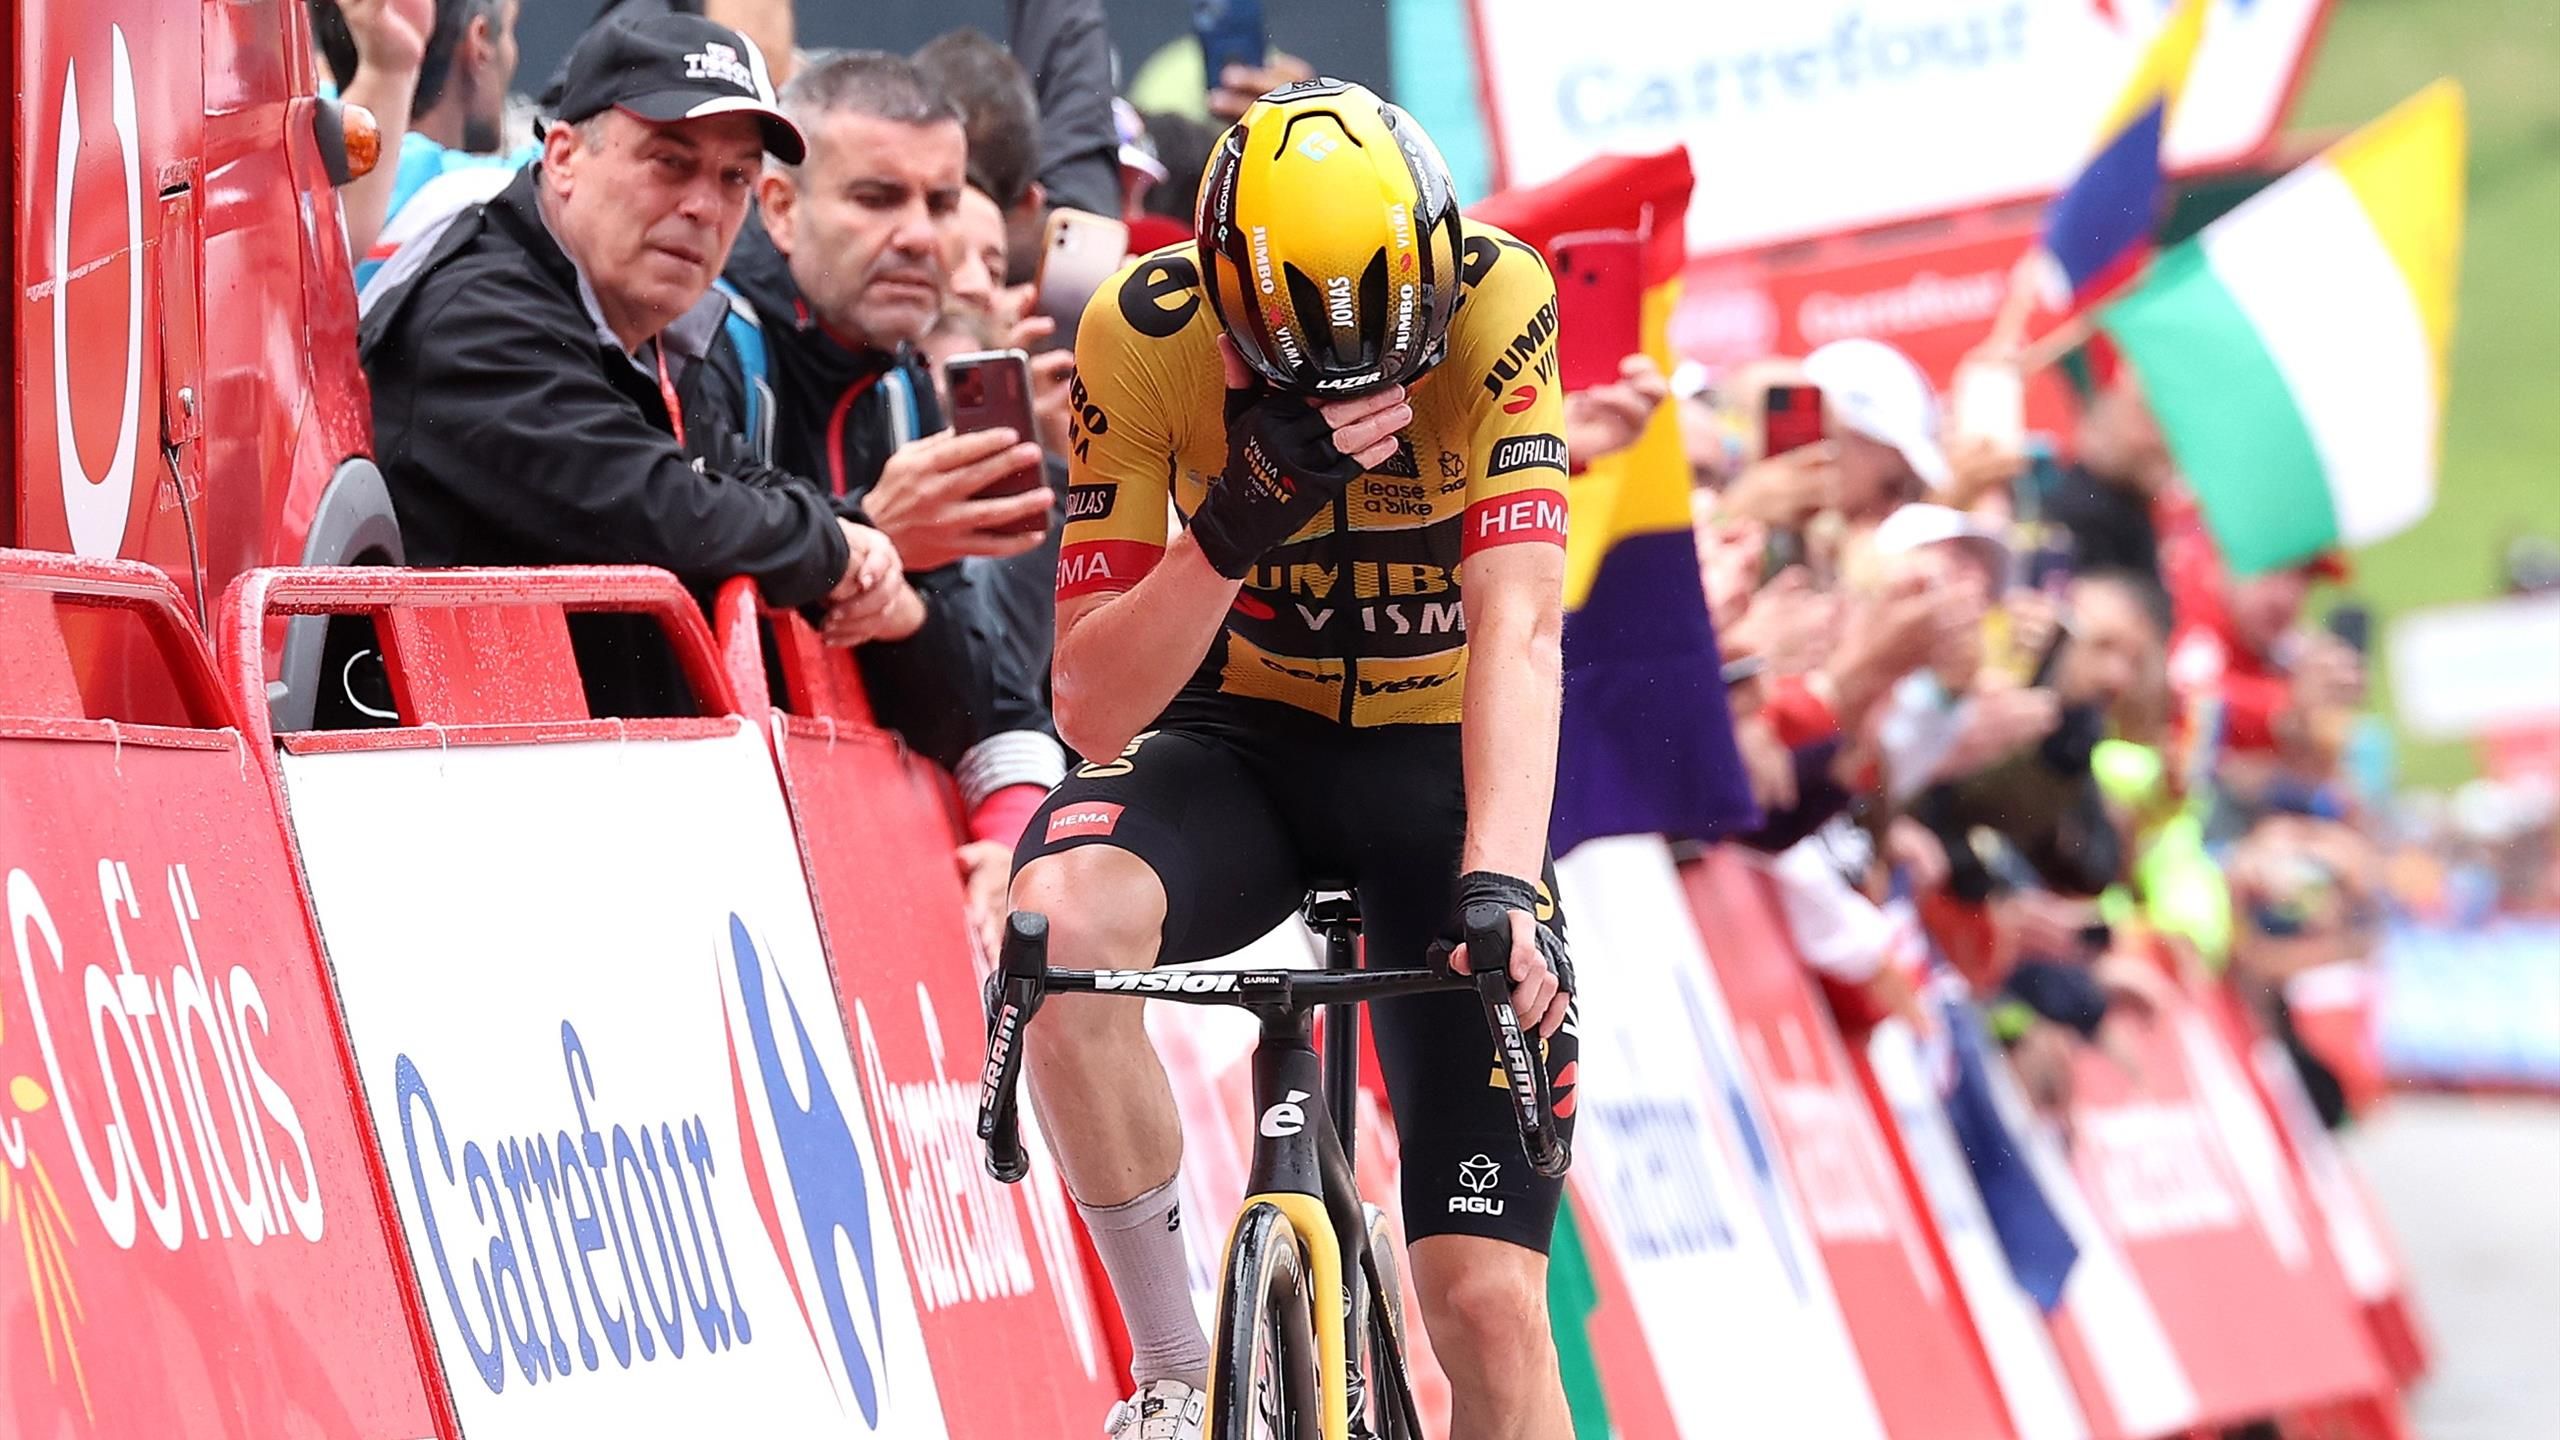 La Vuelta a Espana Jonas Vingegaard takes emotional Stage 16 victory, edges closer to team-mate Sepp Kuss red jersey